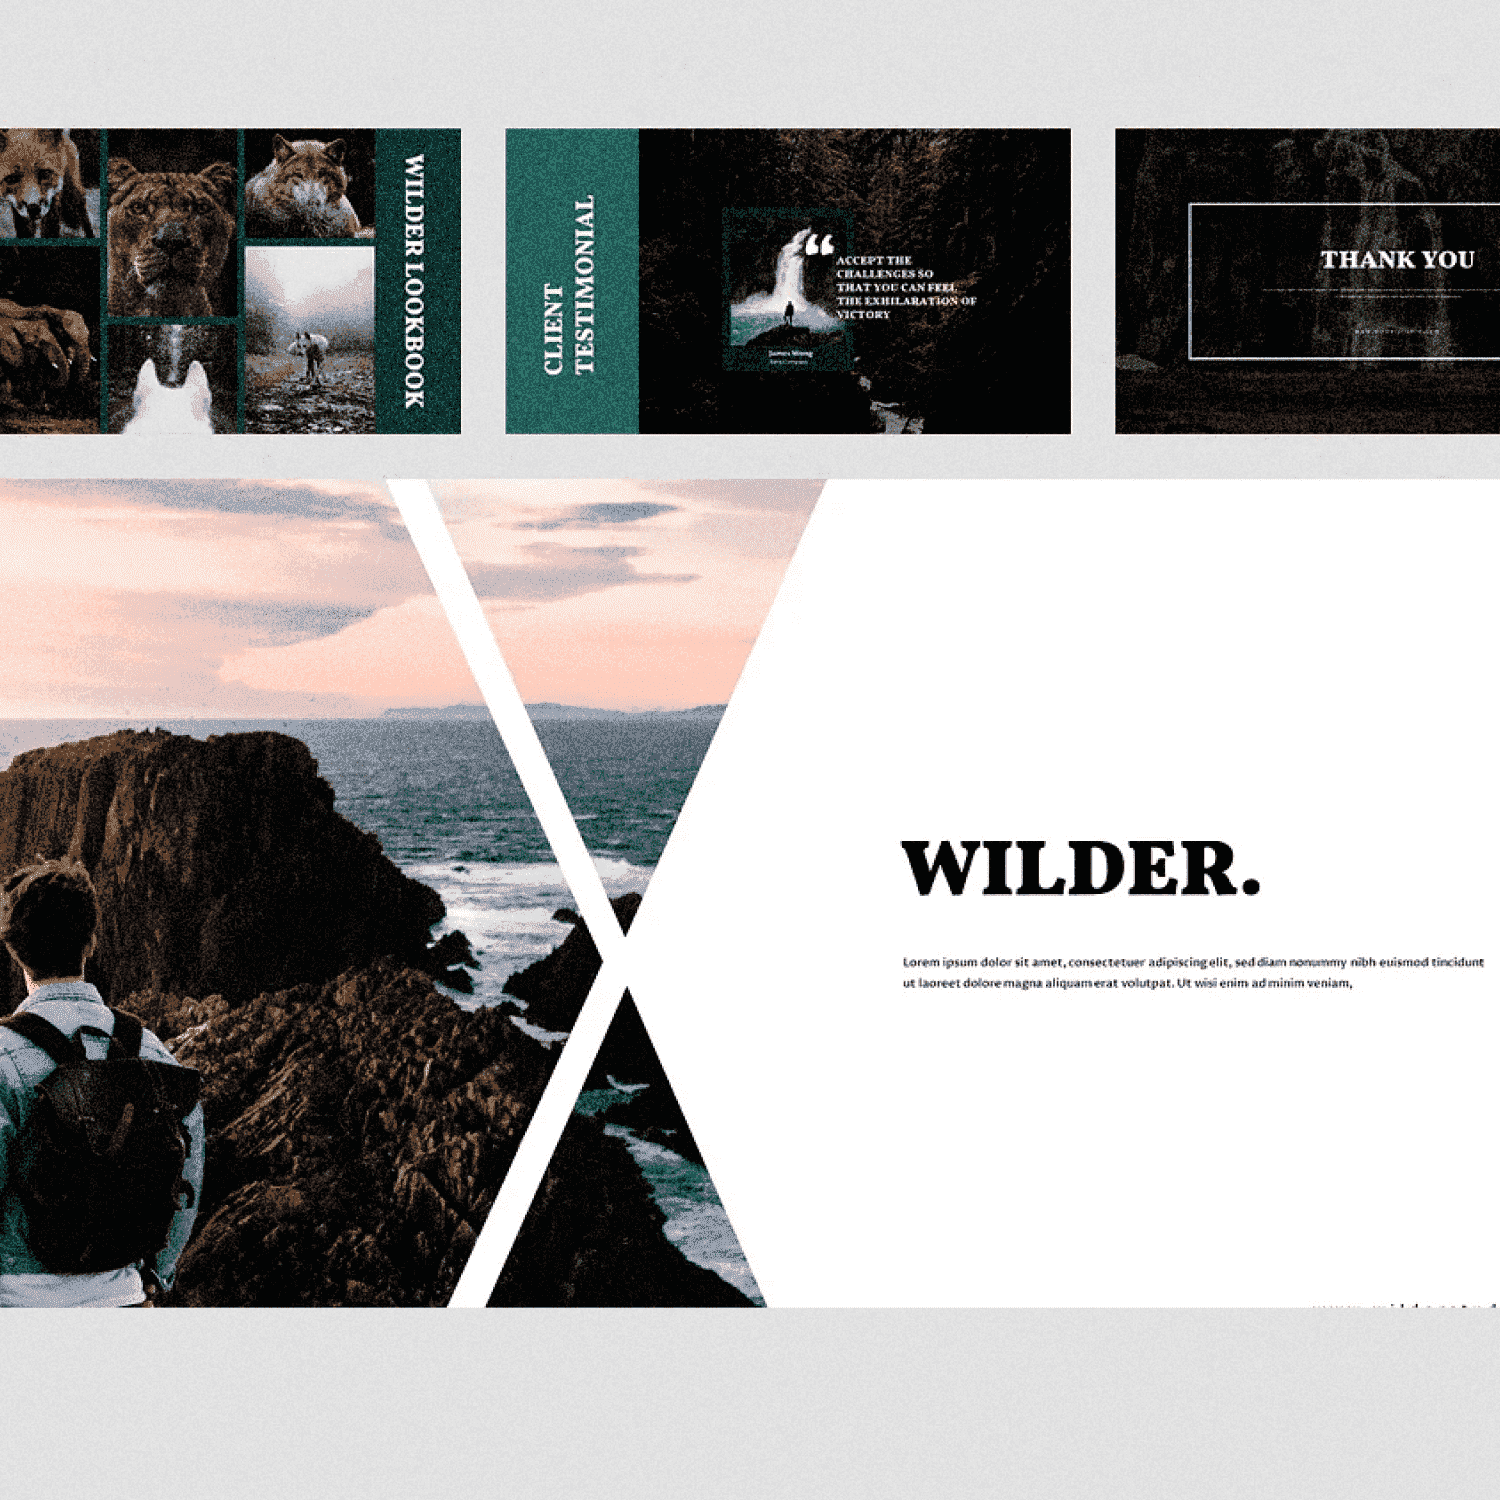 Wilder - Keynote Template Cover Image.